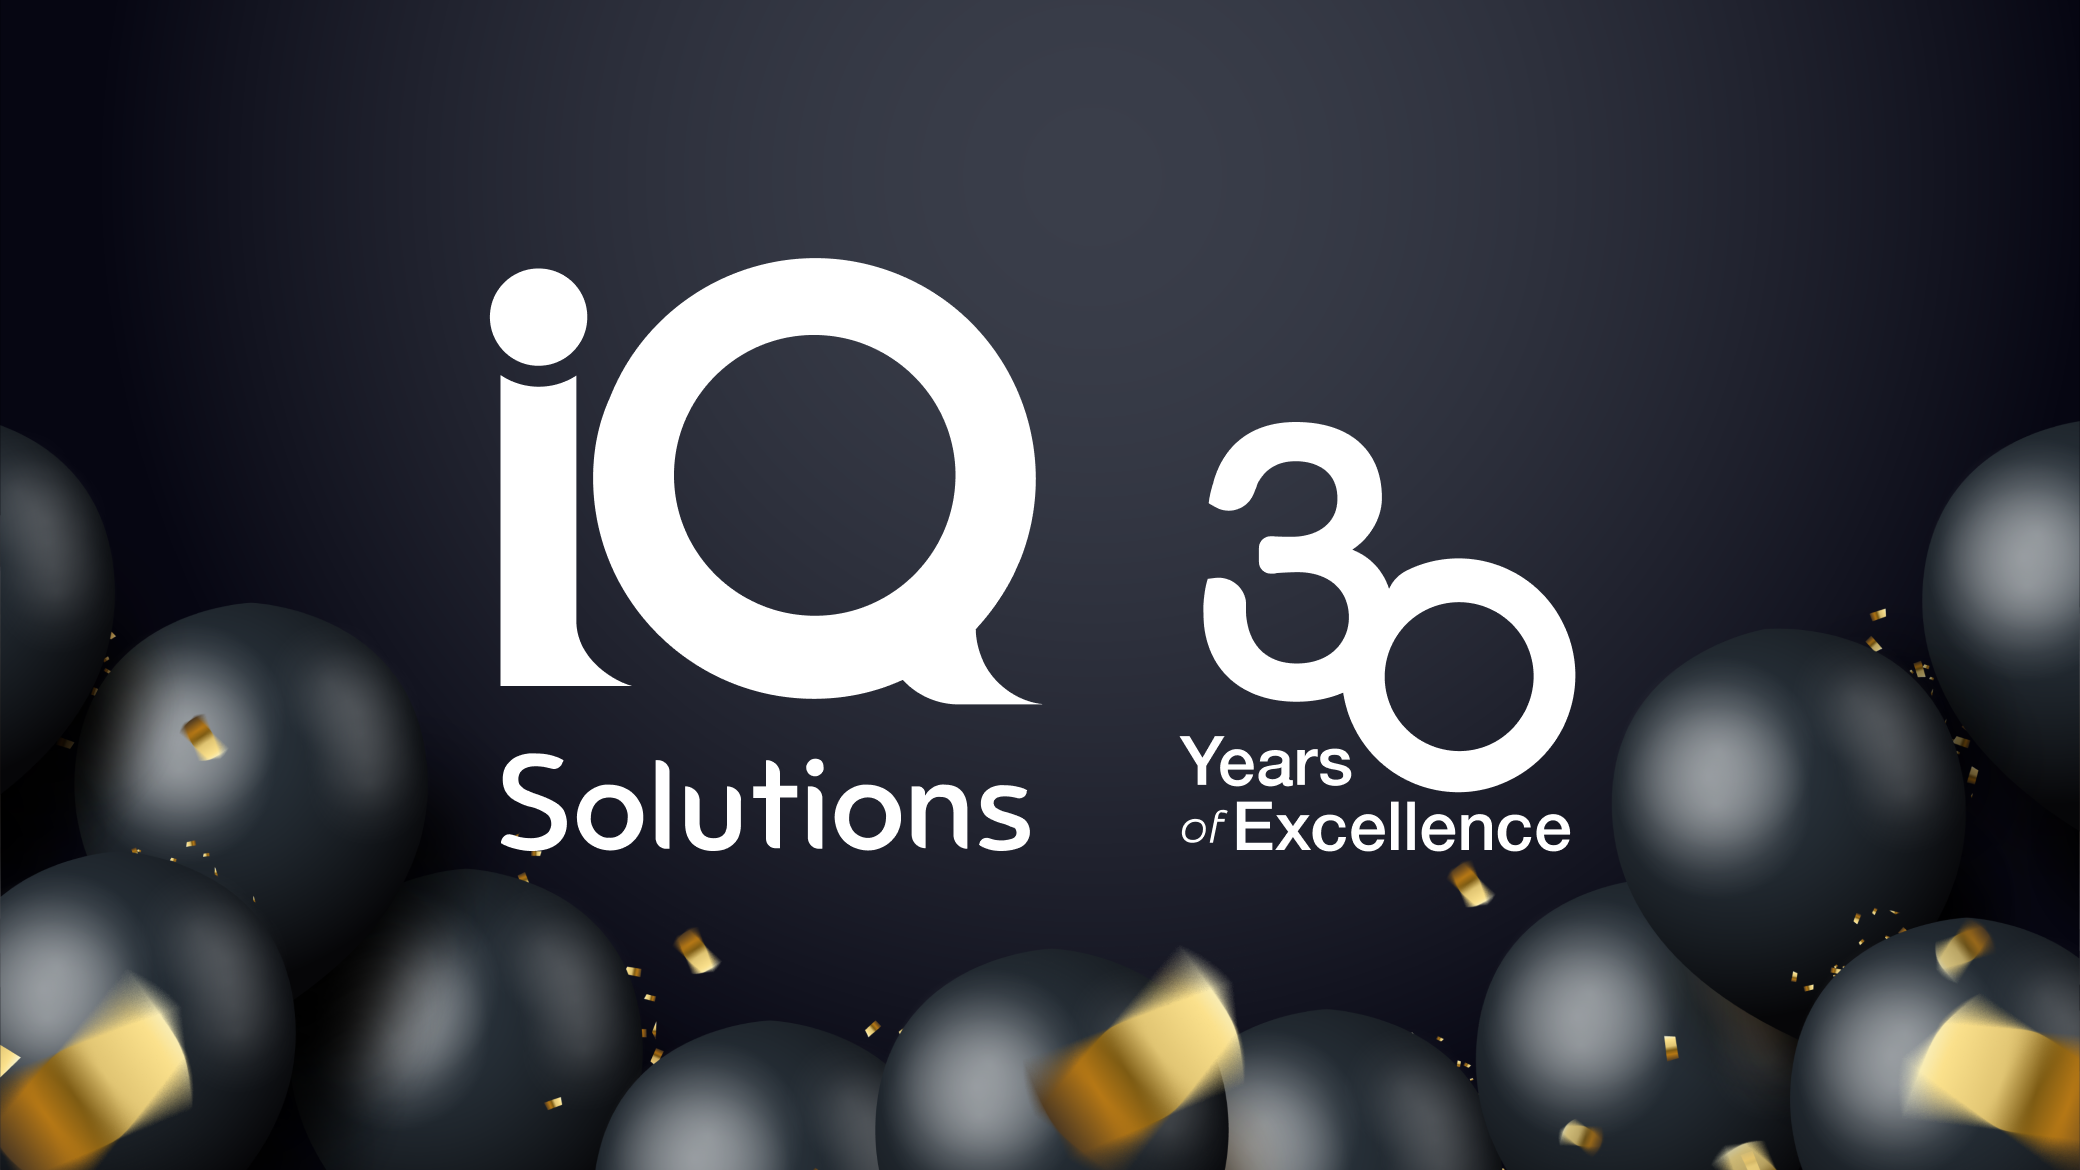 IQ Solutions 30 Years of Excellence